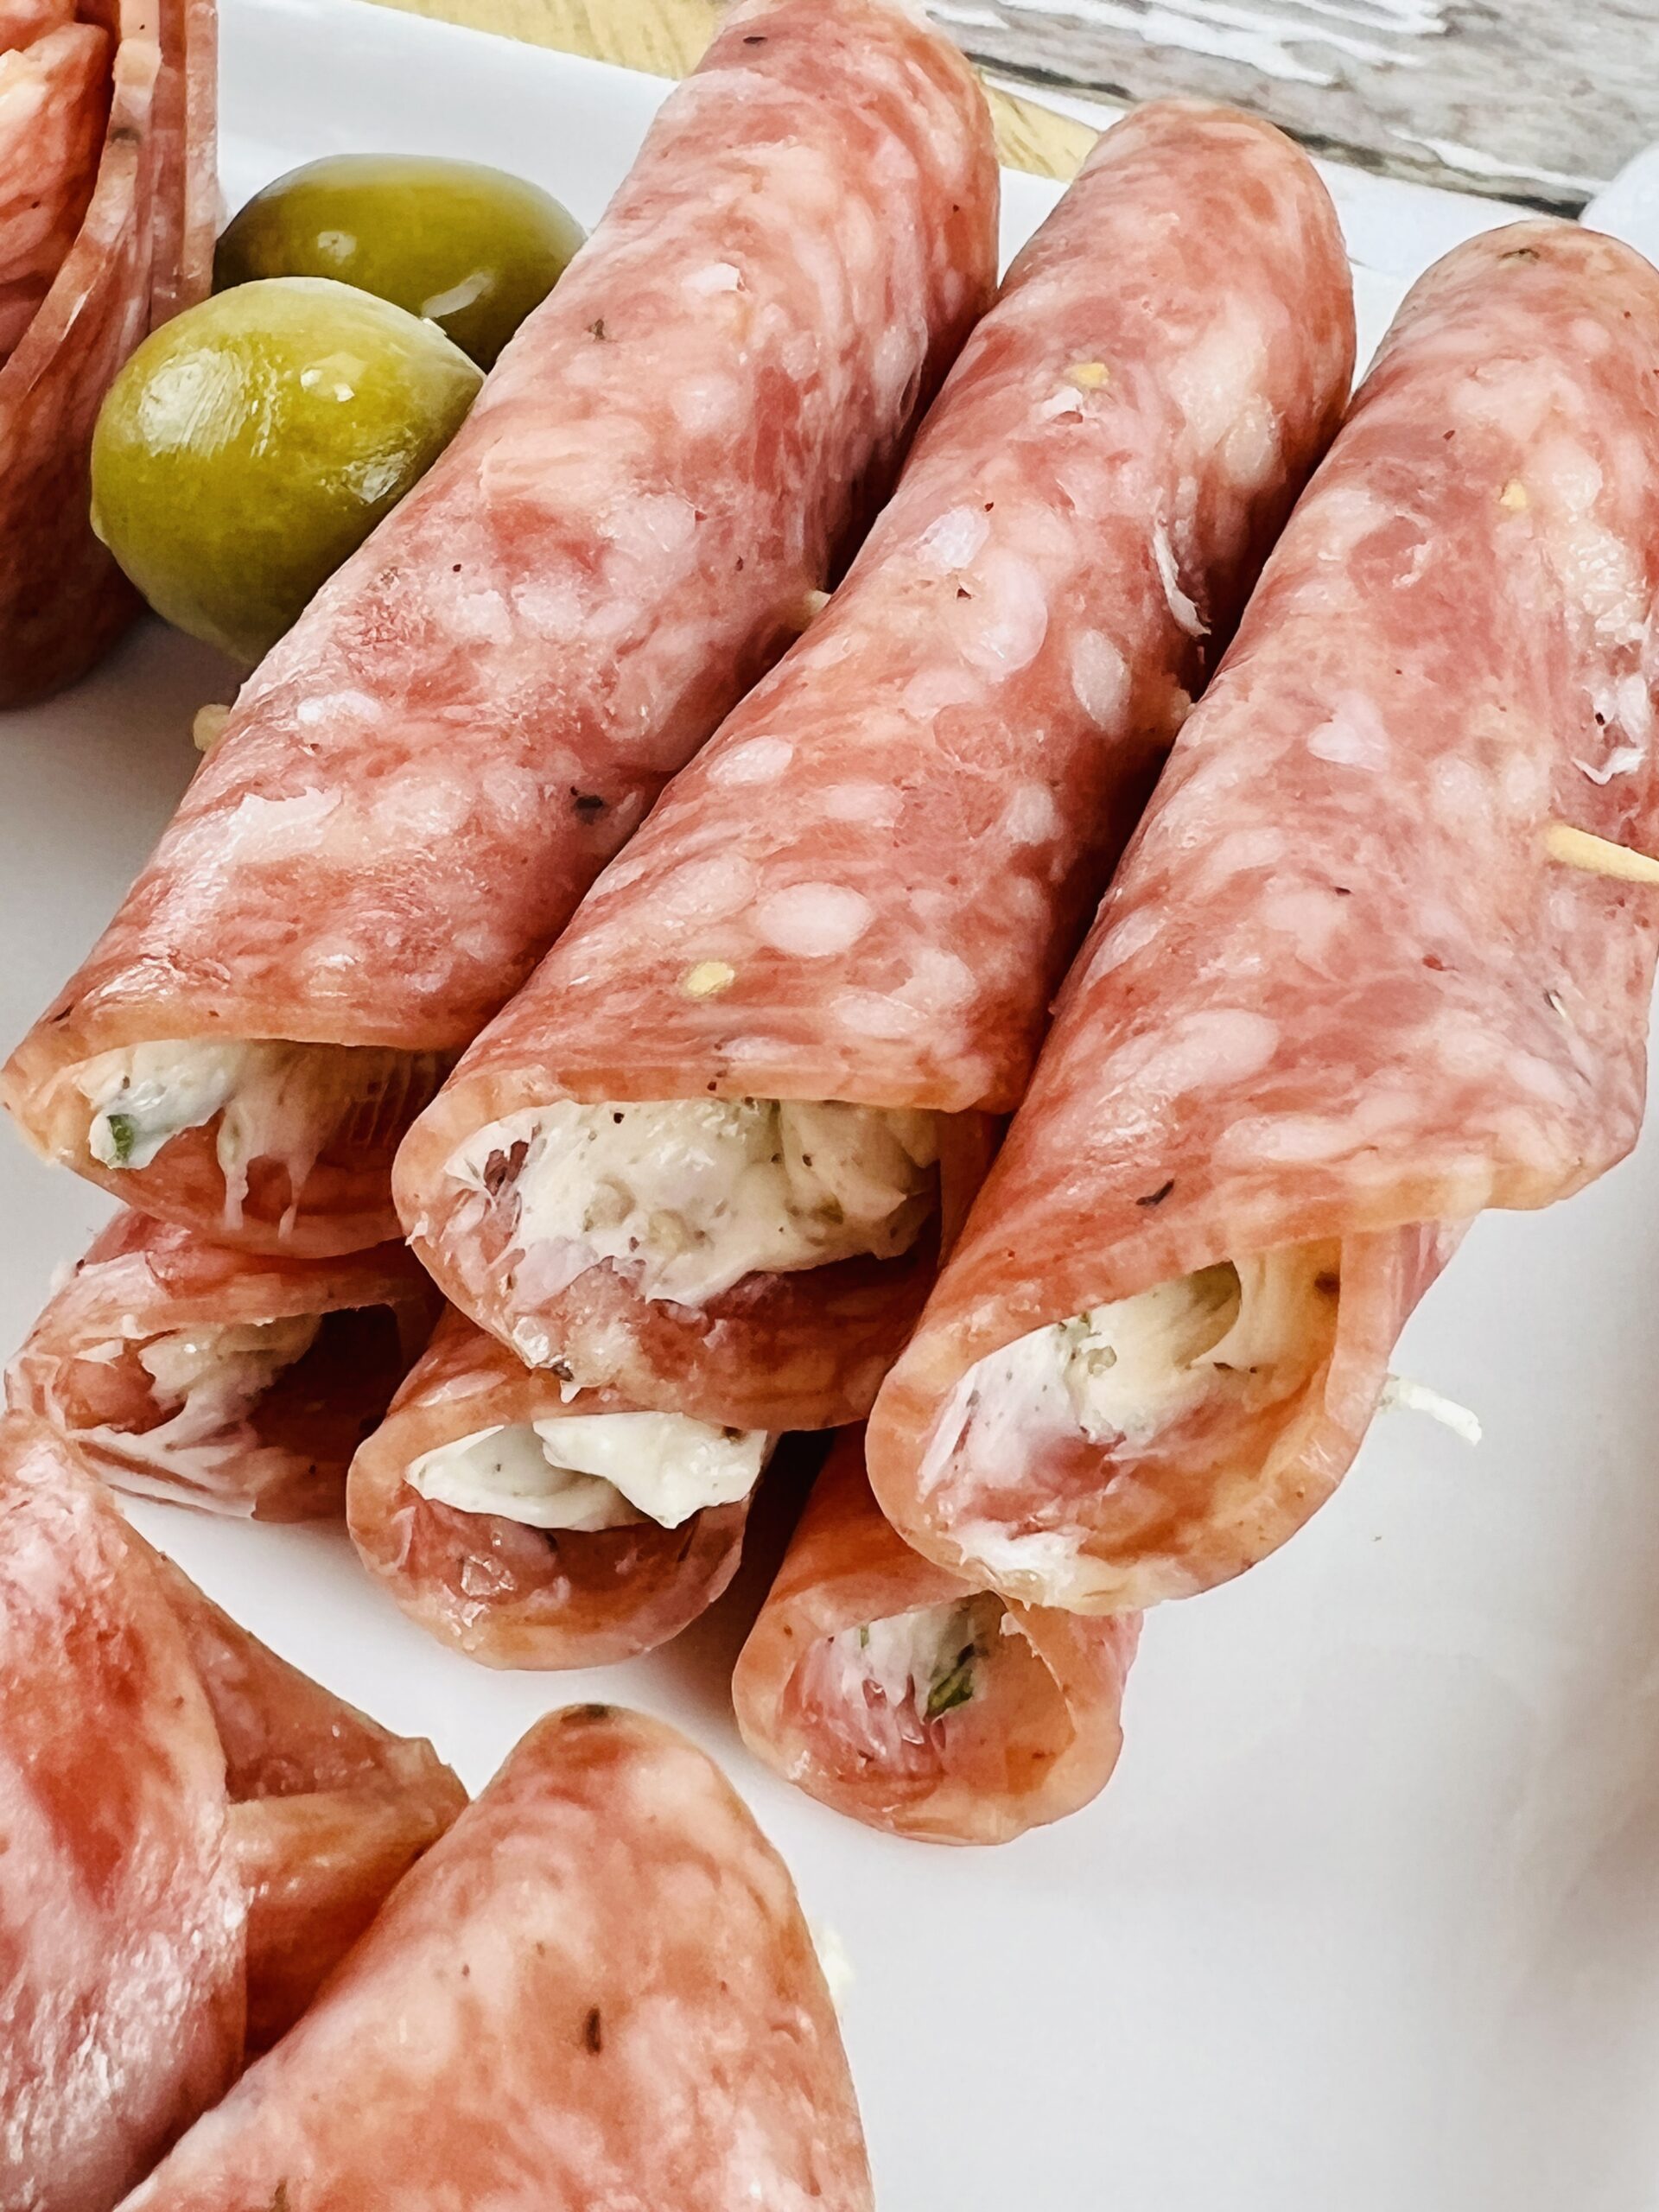 Salami Cream Cheese Roll Ups with green olives on a white plate.